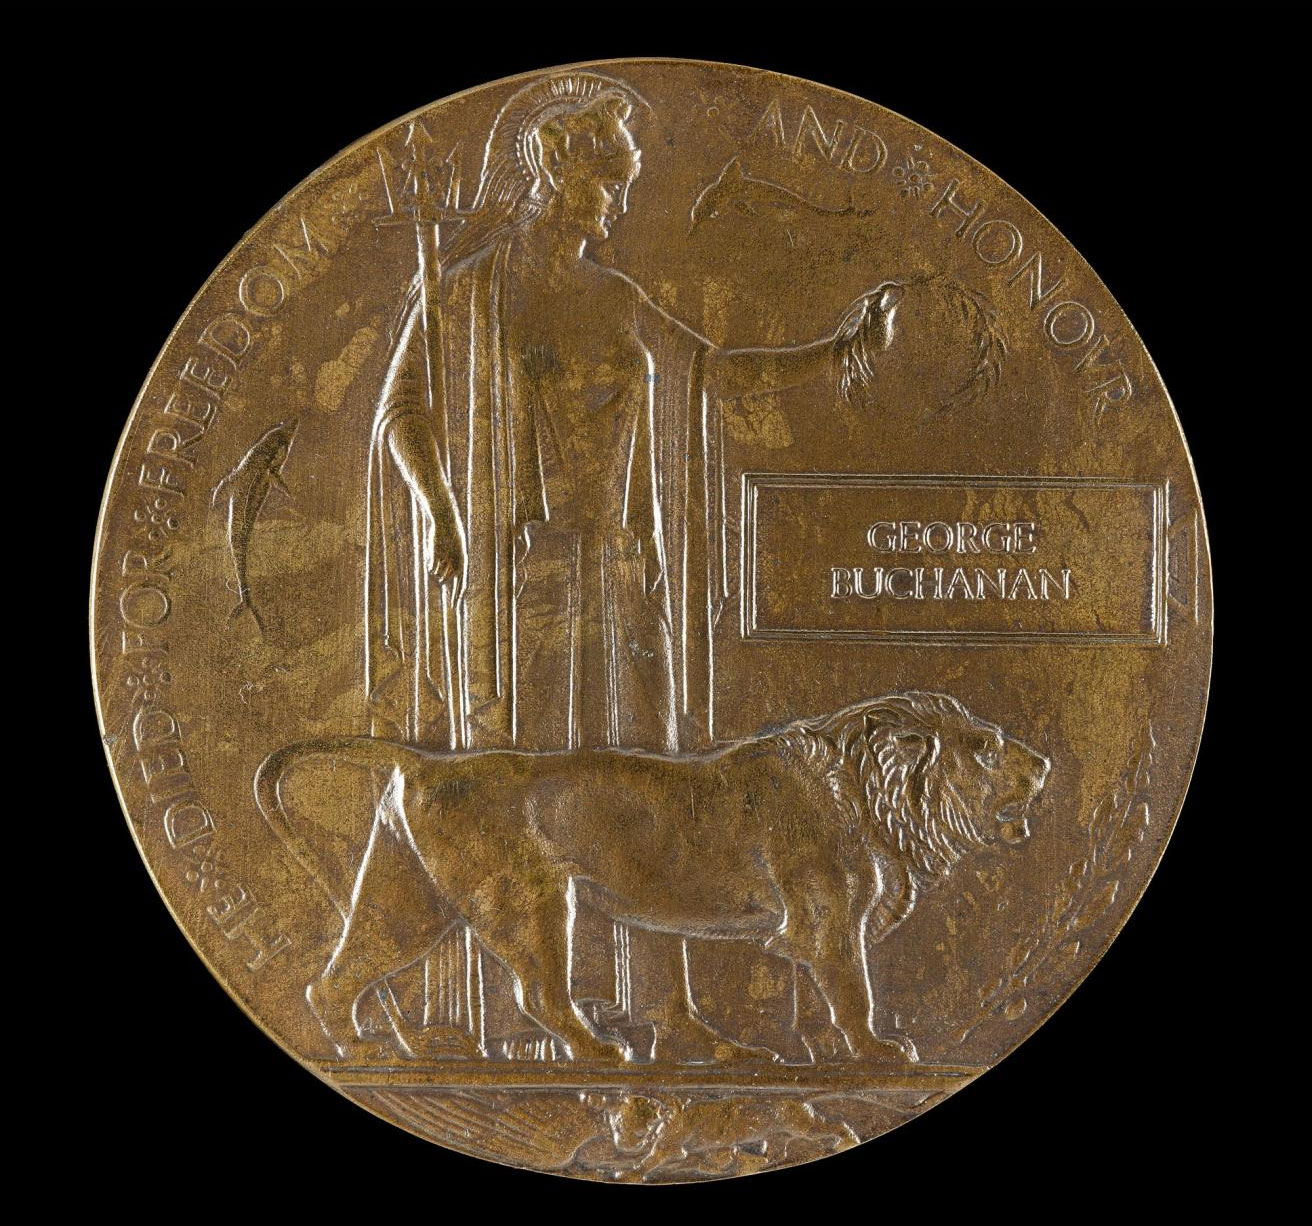 Memorial plaque and scroll sent to George Buchanan’s next of kin by the British Government on behalf of the King following his death at the Battle of Loos on 25 September 1915.